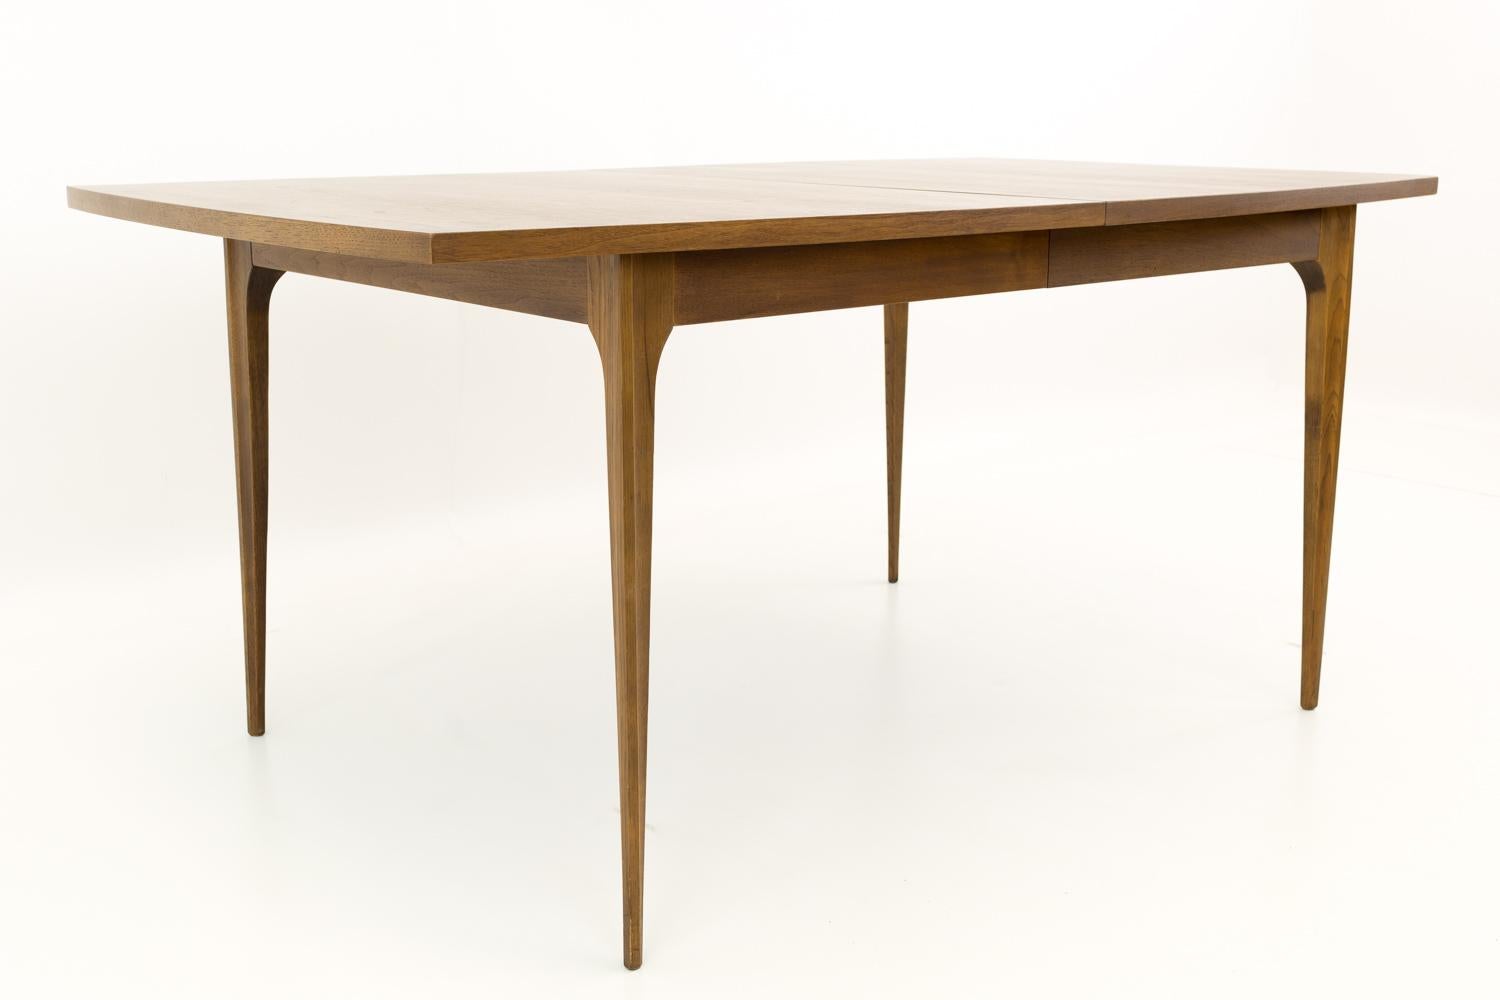 Broyhill Brasilia mid century walnut surfboard dining table - with one leaf.

Table measures: 66 wide x 40 deep x 30 inches high and has a chair clearance of 26 inches. When the 11